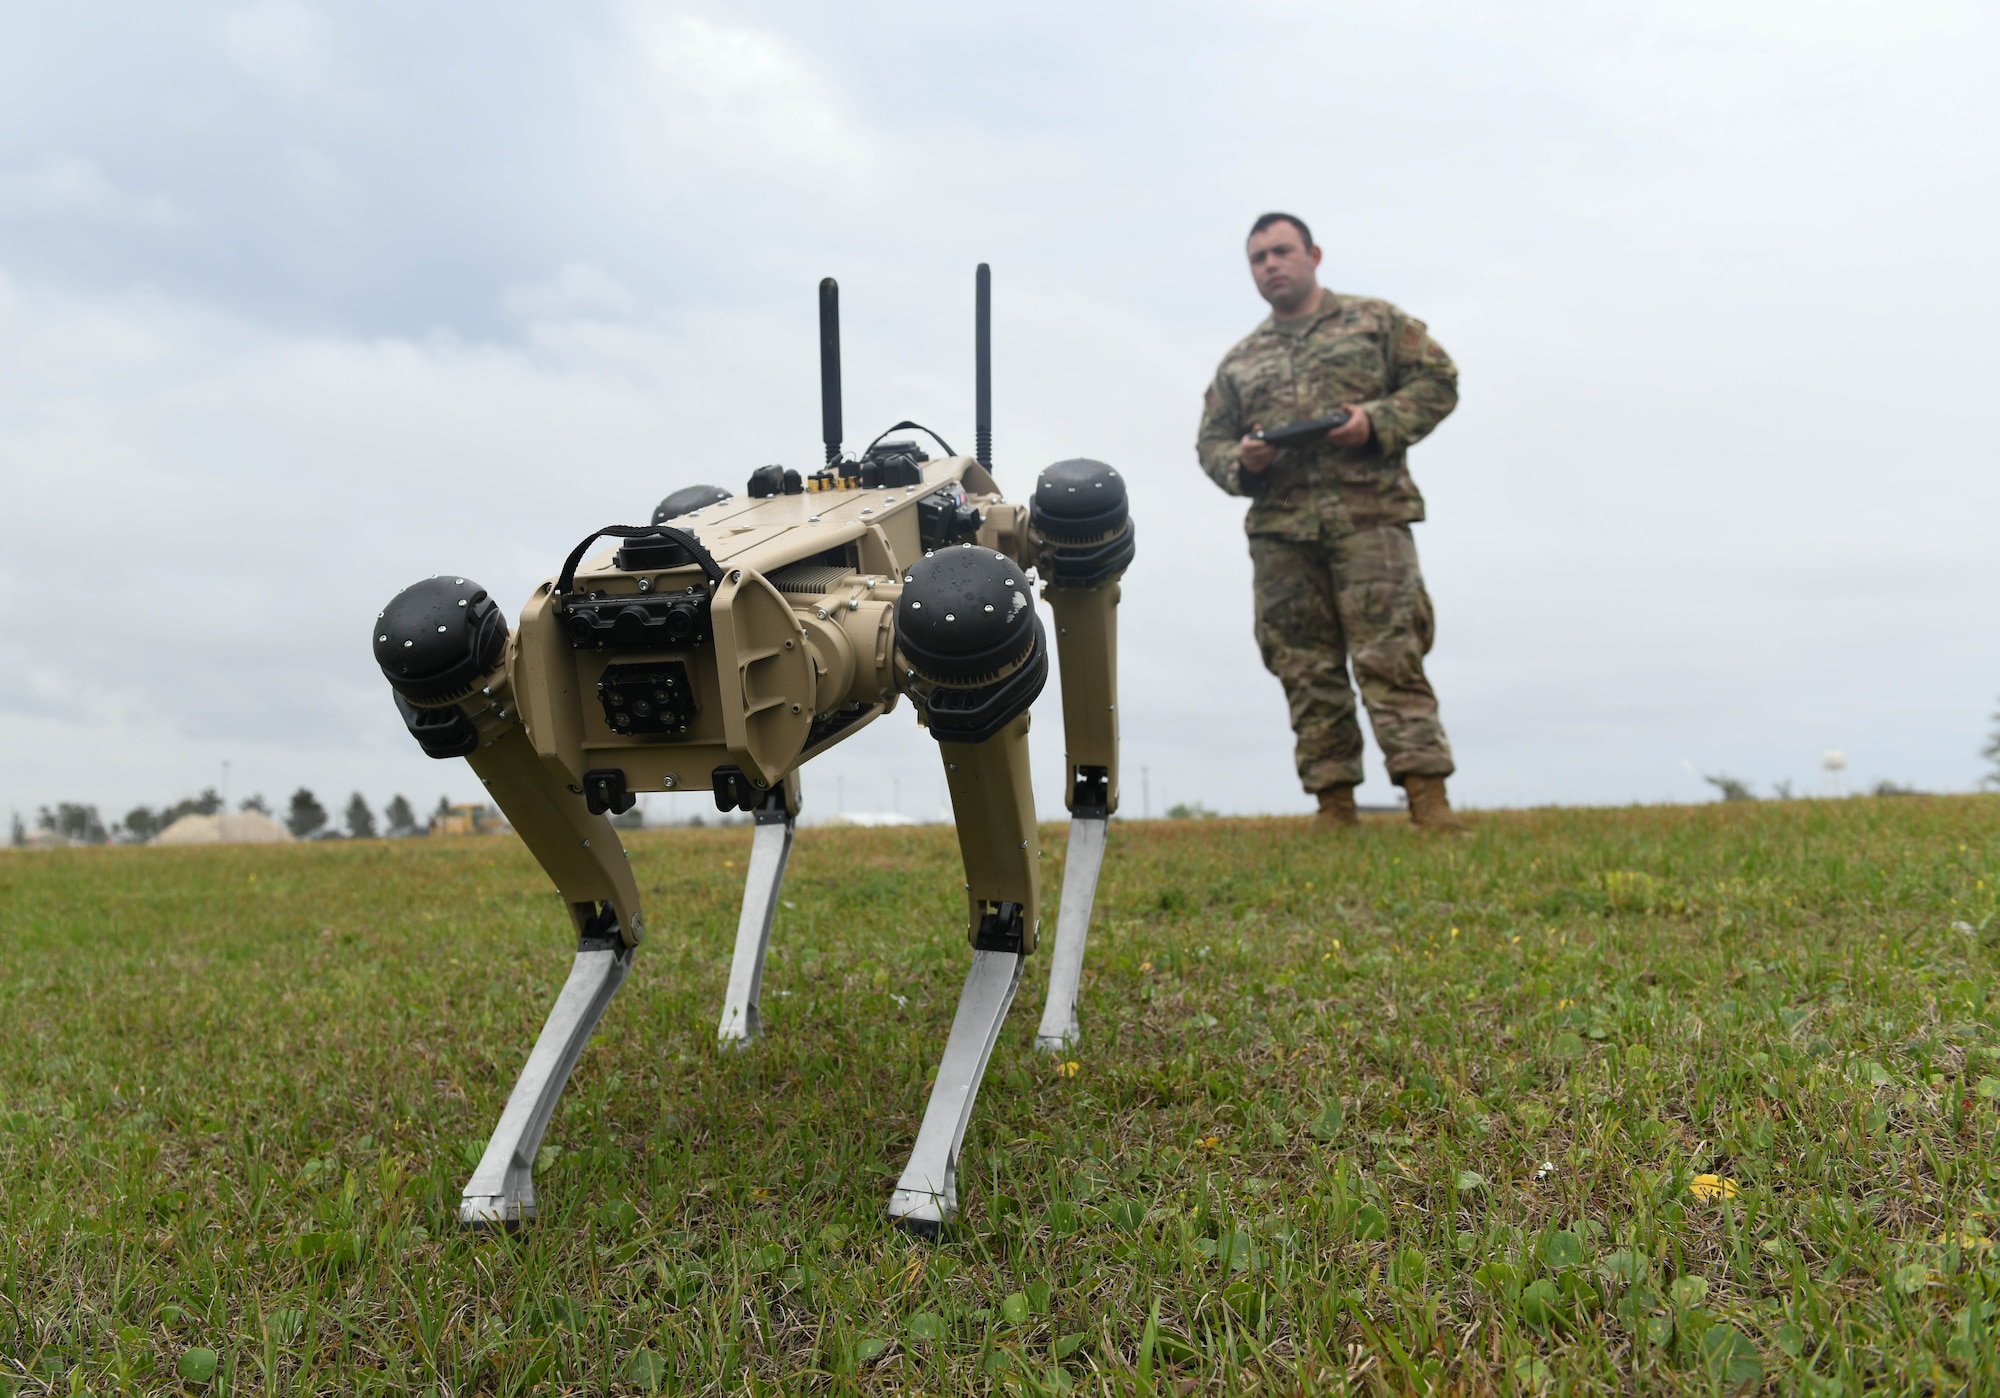 A uniformed Airman is controlling a robot dog by it's controller